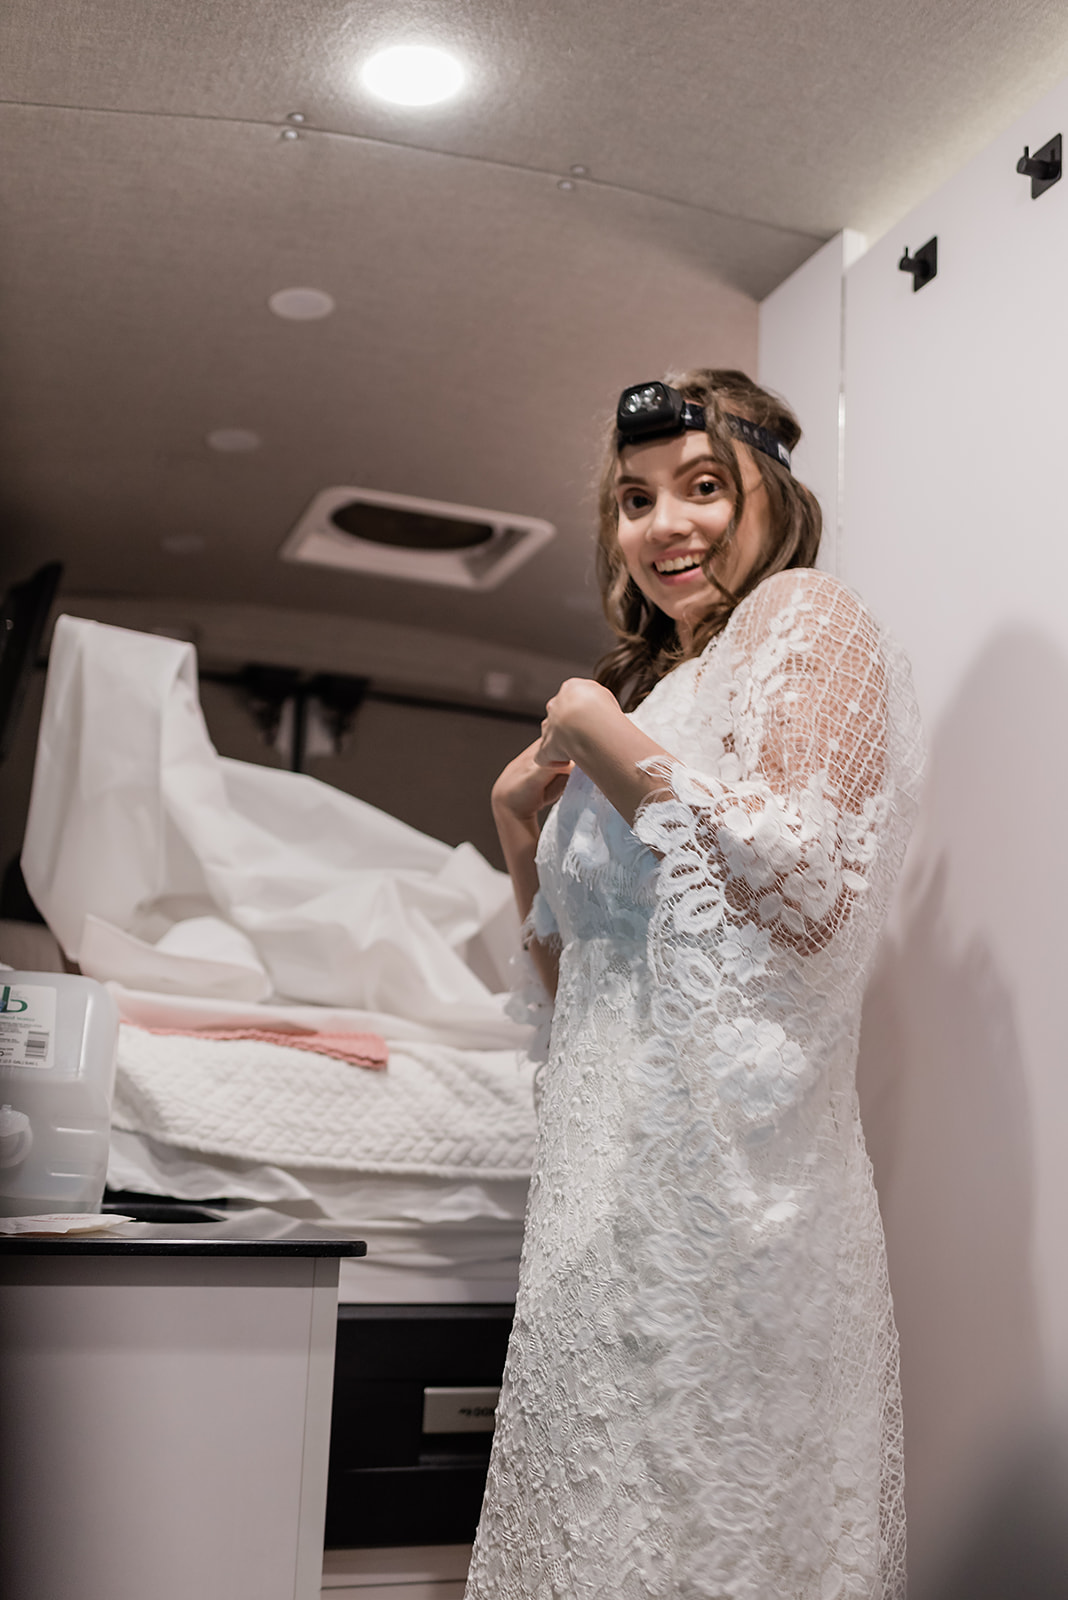 This is a picture of a bride getting ready in a sprinter van.